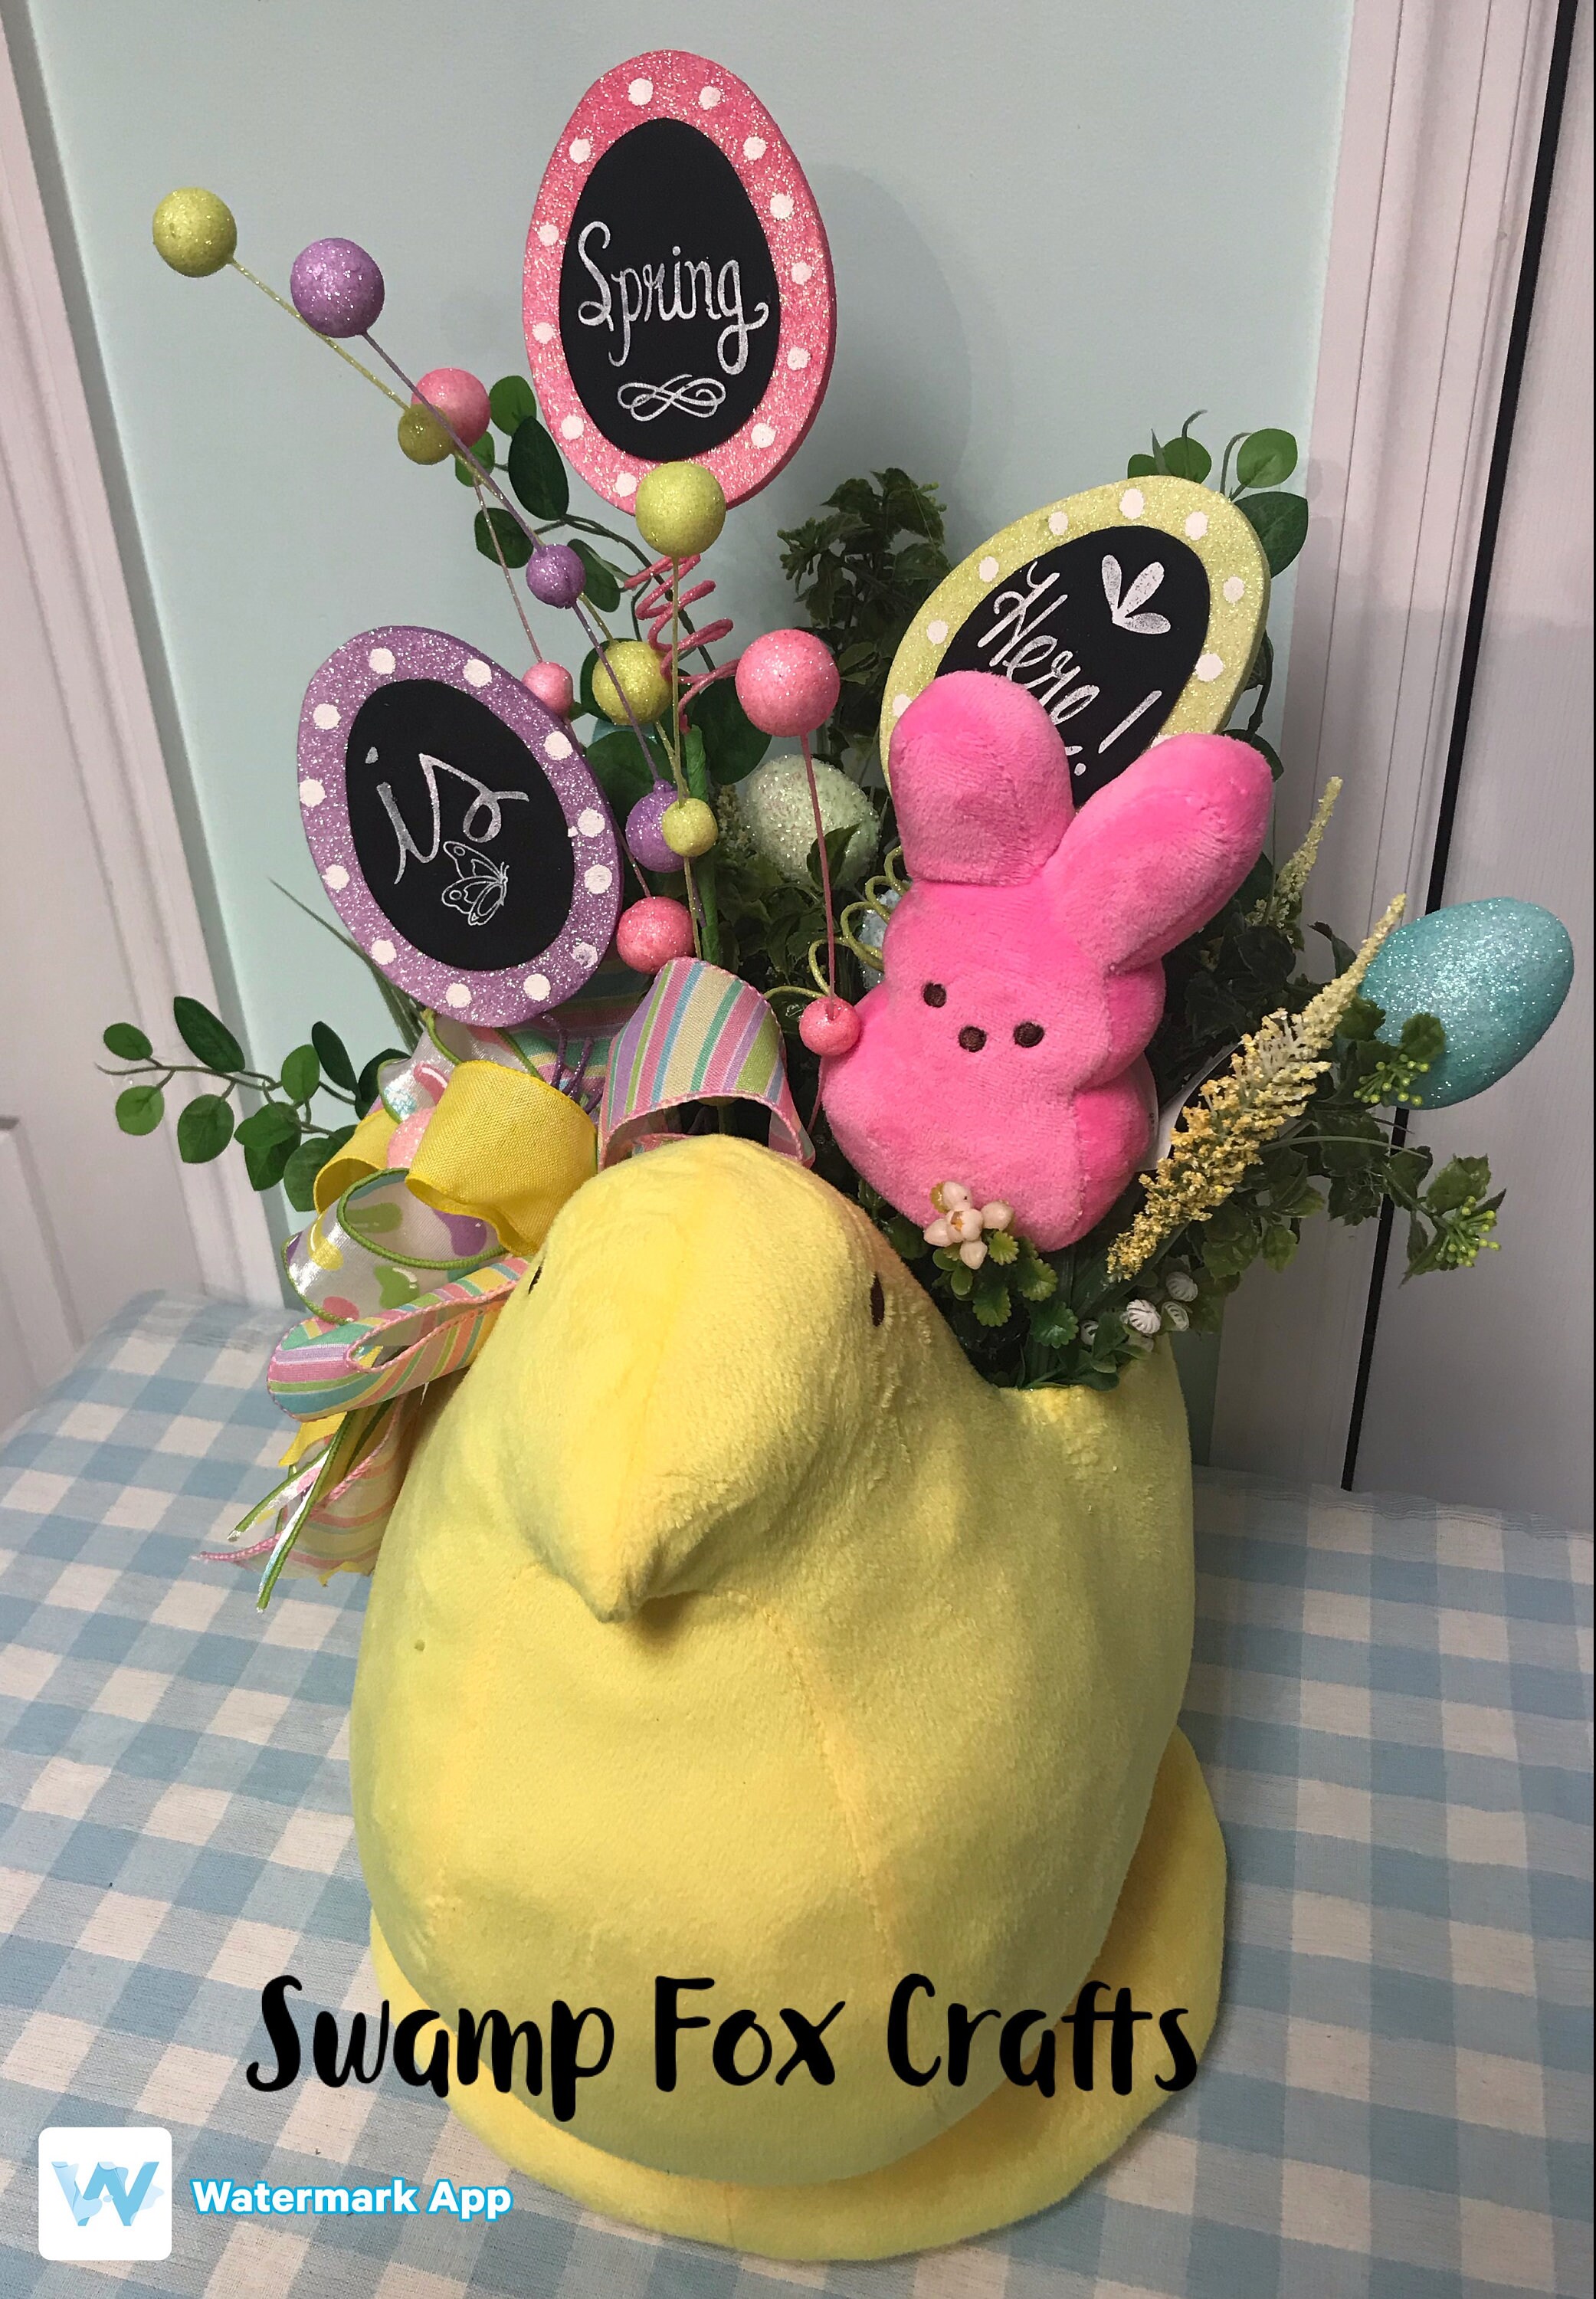 Anybody scrolling by new, enjoy a picture of my giant Peeps plush, because  why not! : r/teenagers